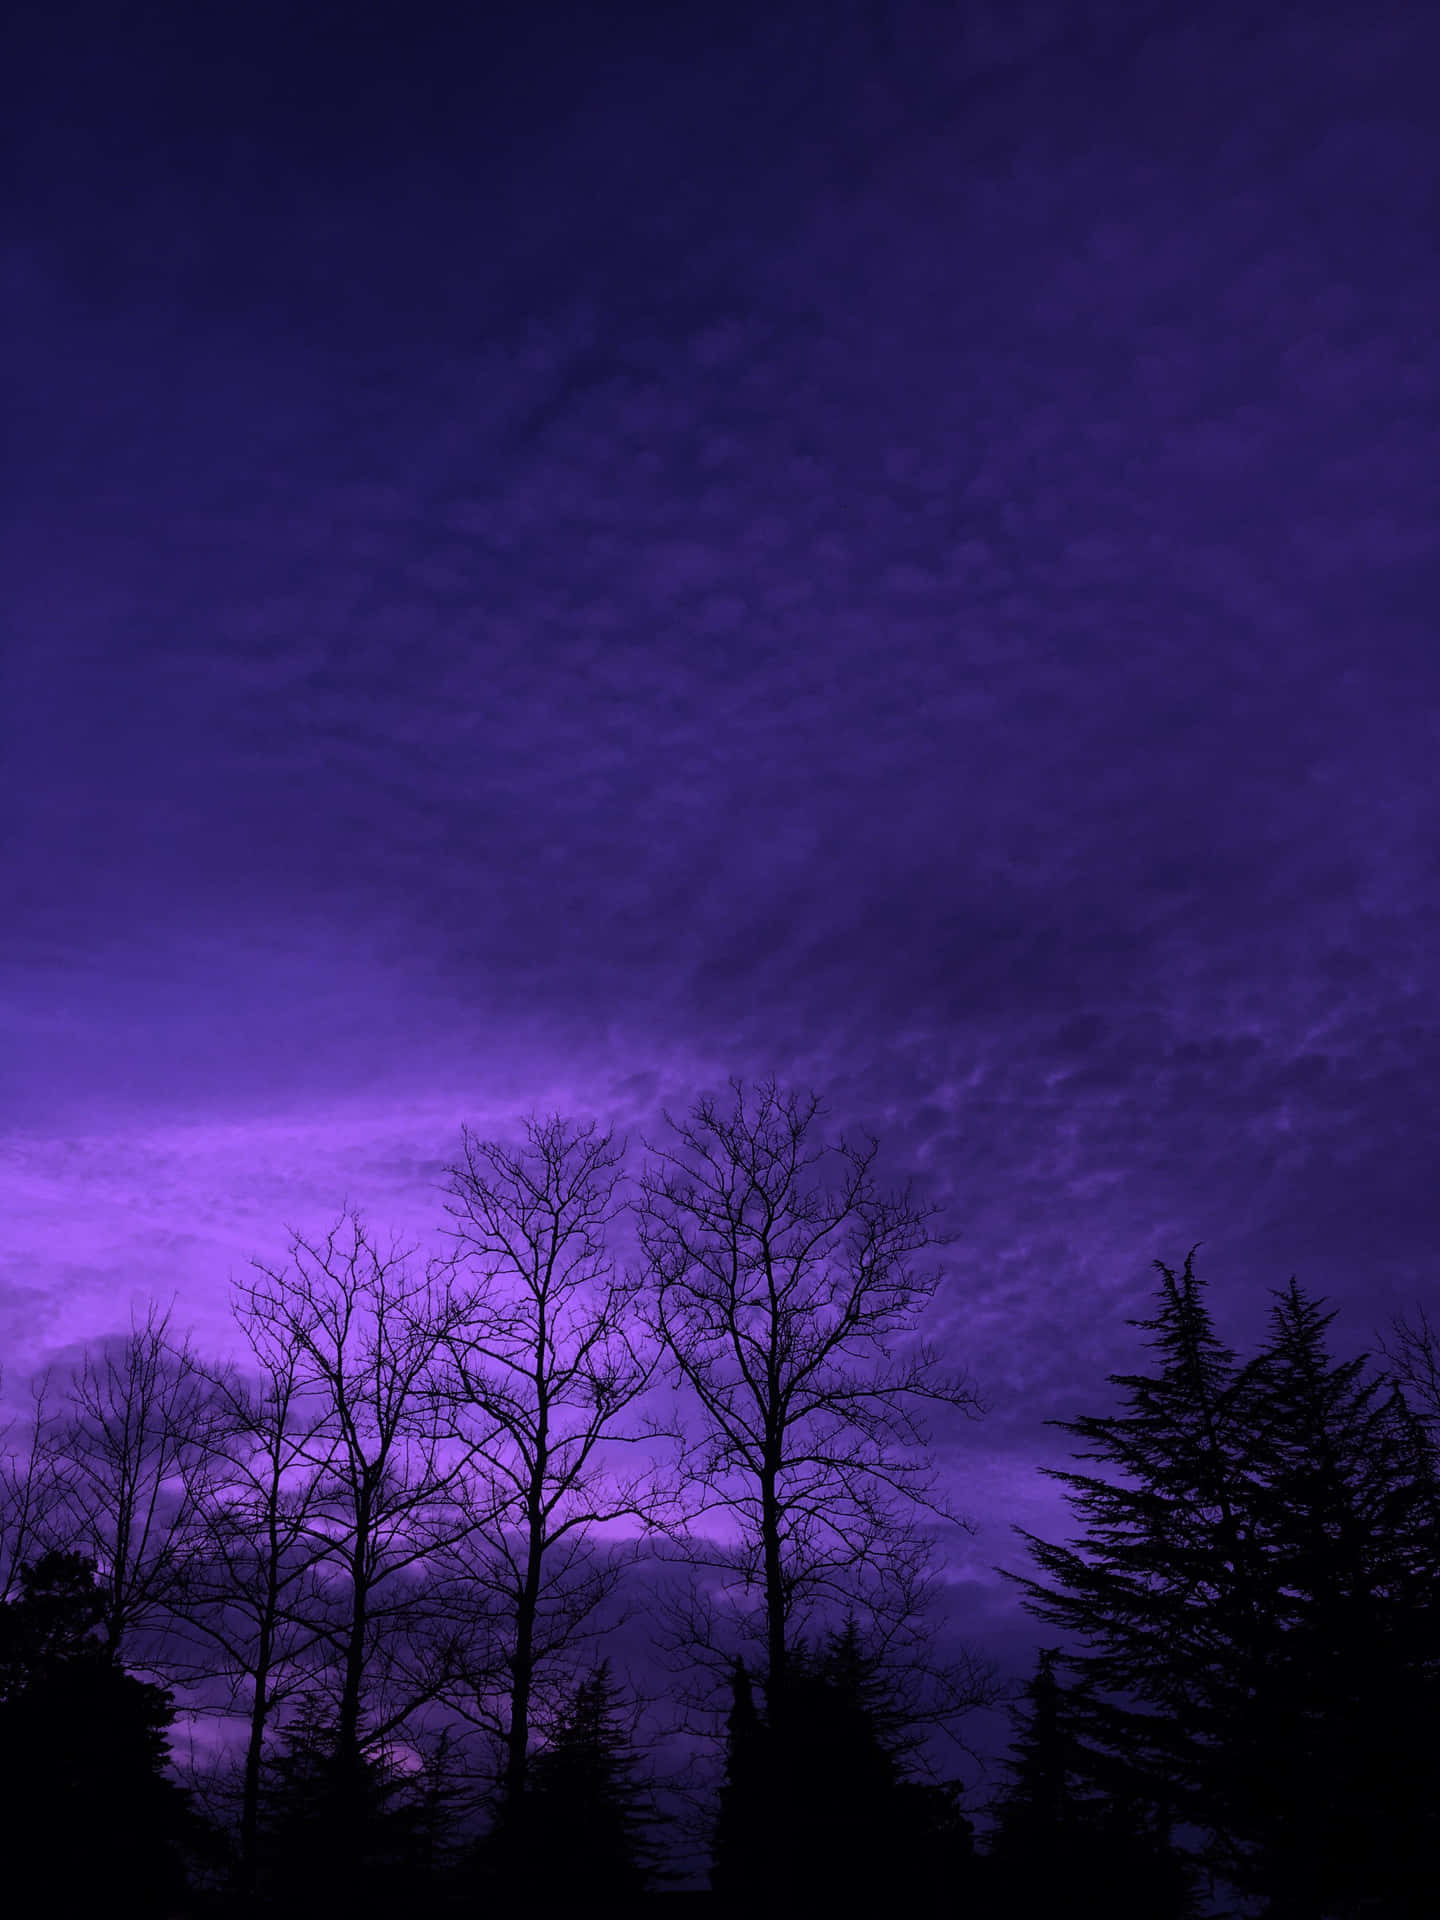 Aesthetic Nature With A Purple Sky Wallpaper